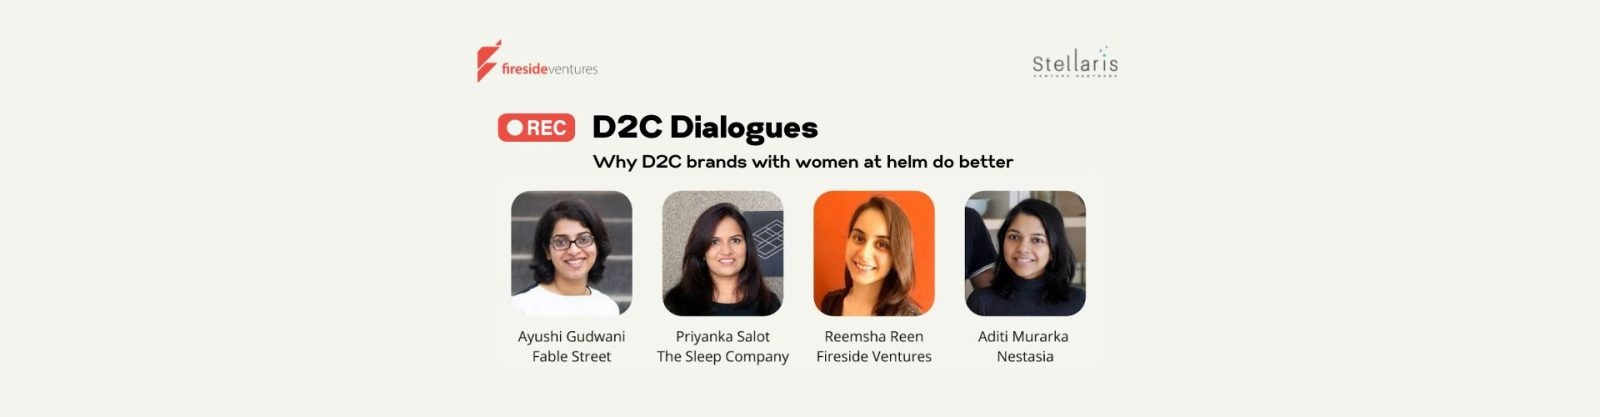 D2C Dialogues #11: Why D2C brands with women at helm do better